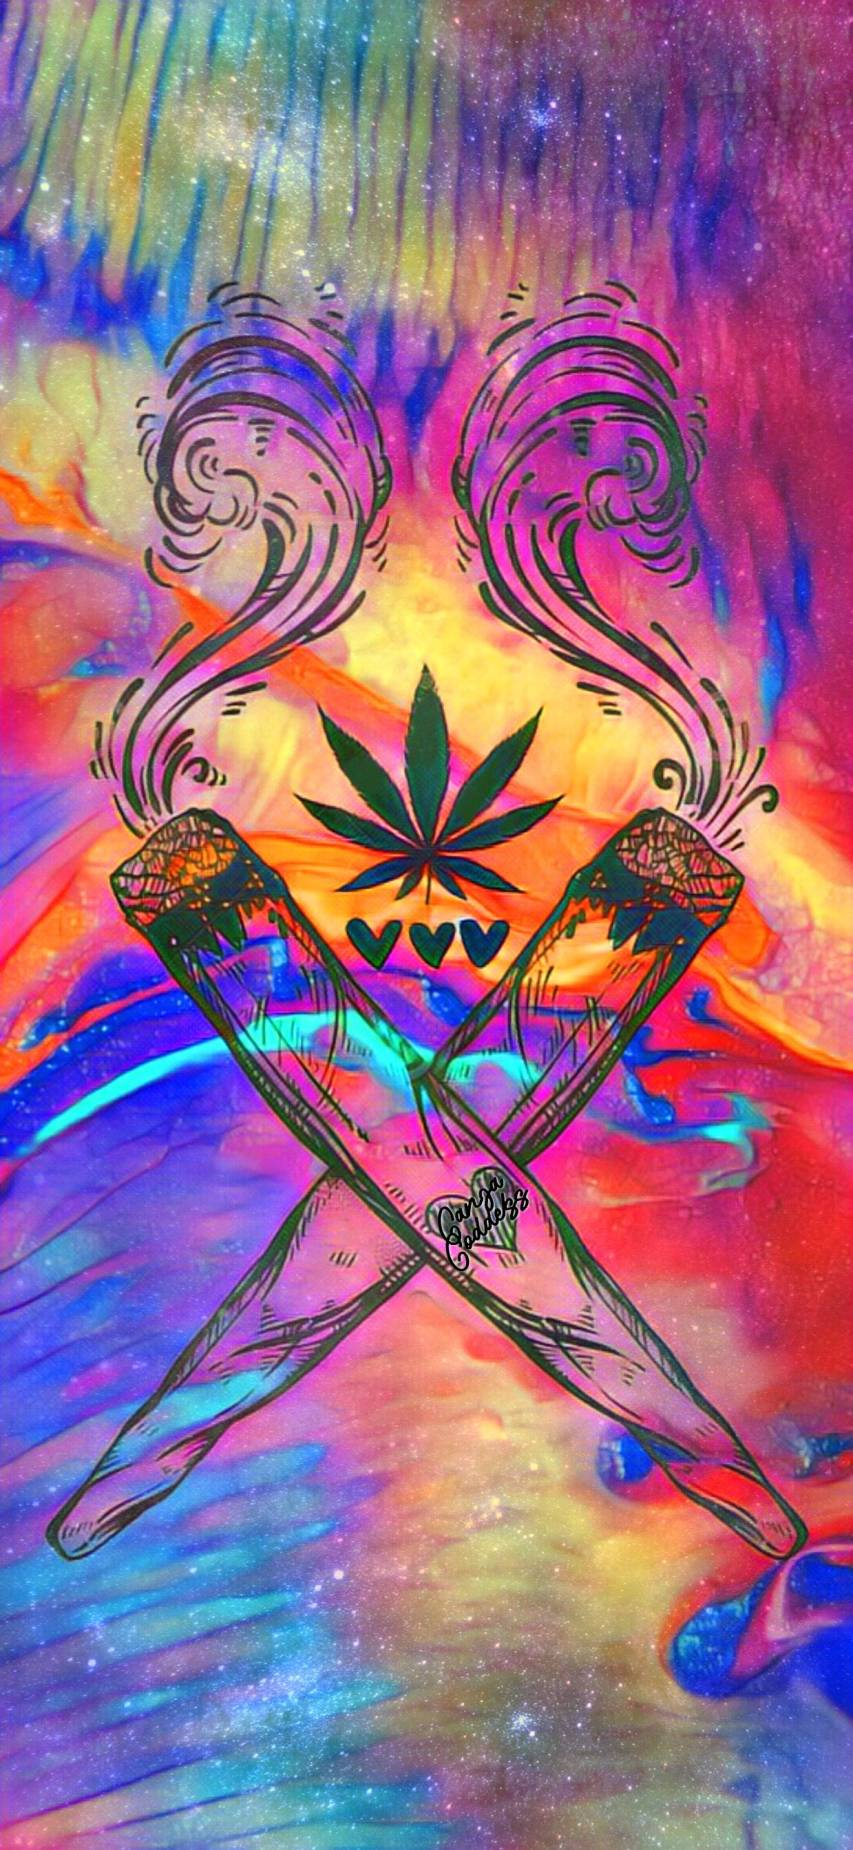 Weed Art Trippy Wallpaper for iPhone